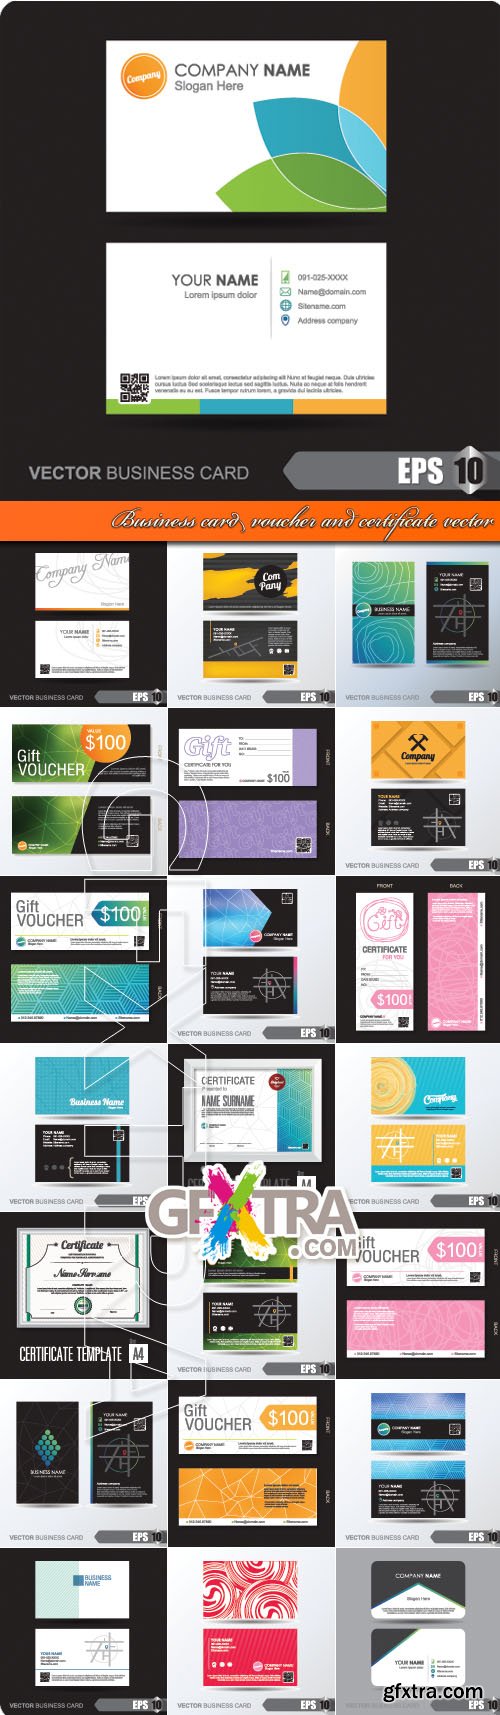 Business card voucher and certificate vector